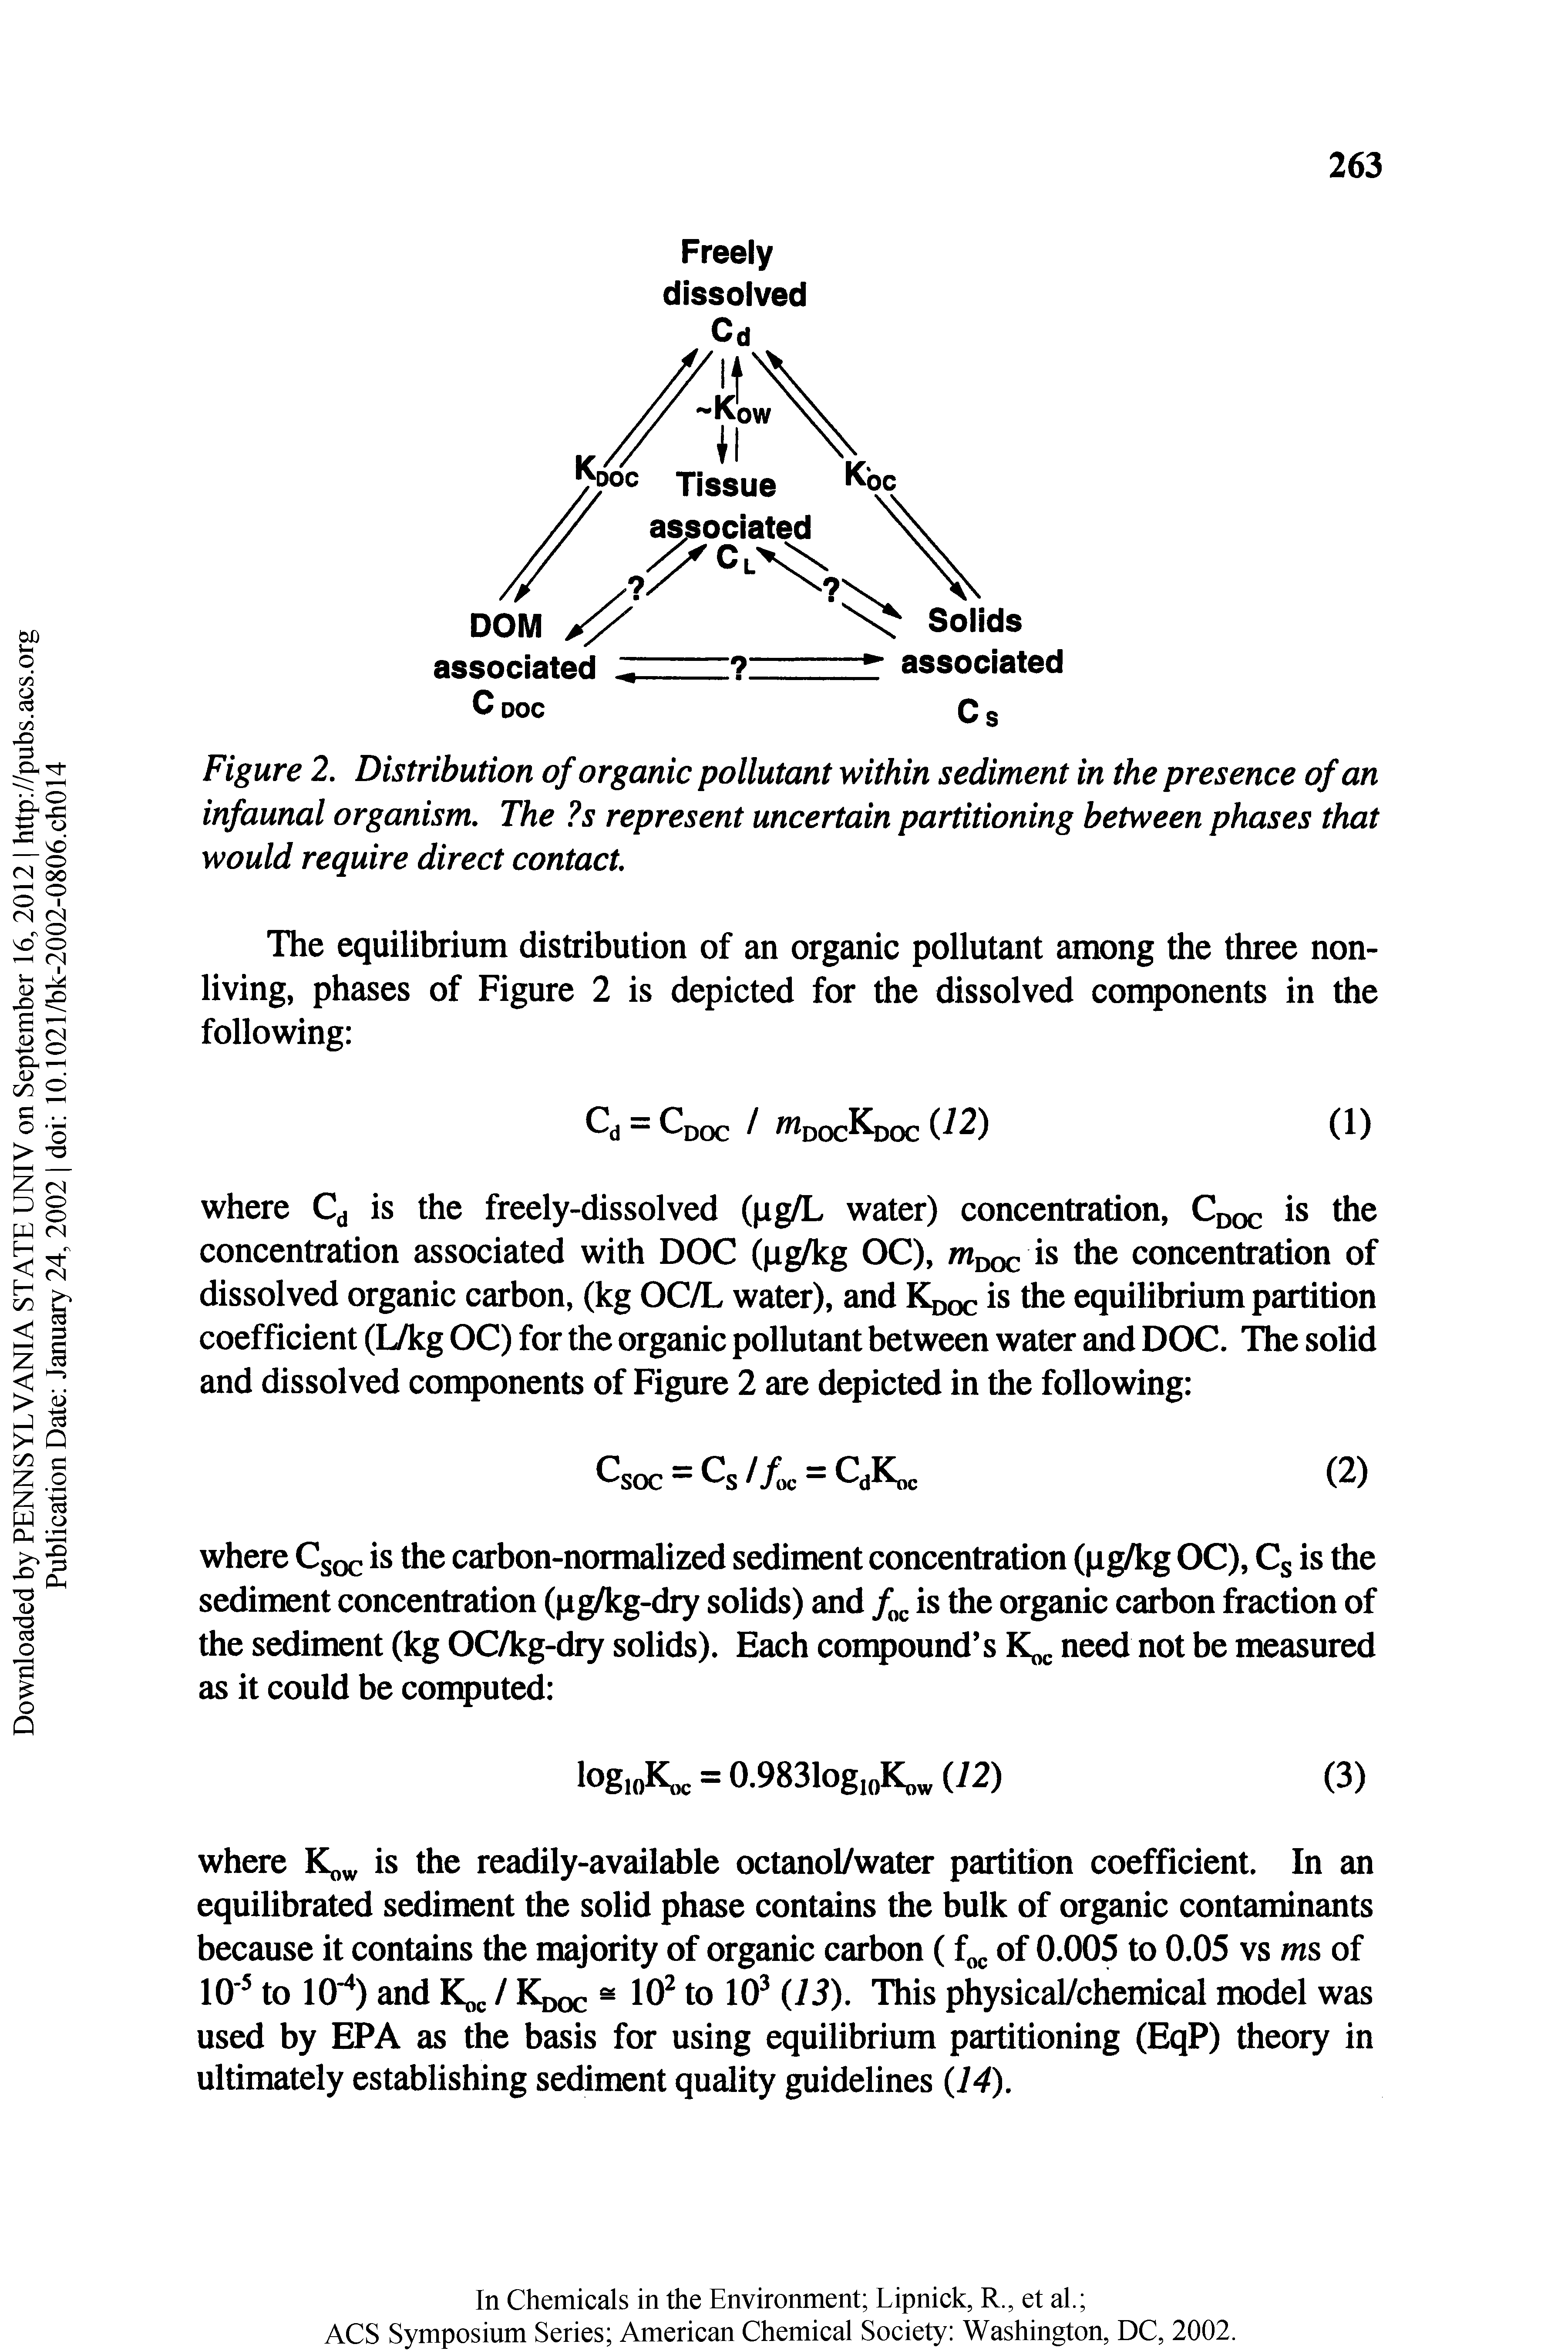 Figure 2. Distribution of organic pollutant within sediment in the presence of an infaunal organism. The s represent uncertain partitioning between phases that would require direct contact.